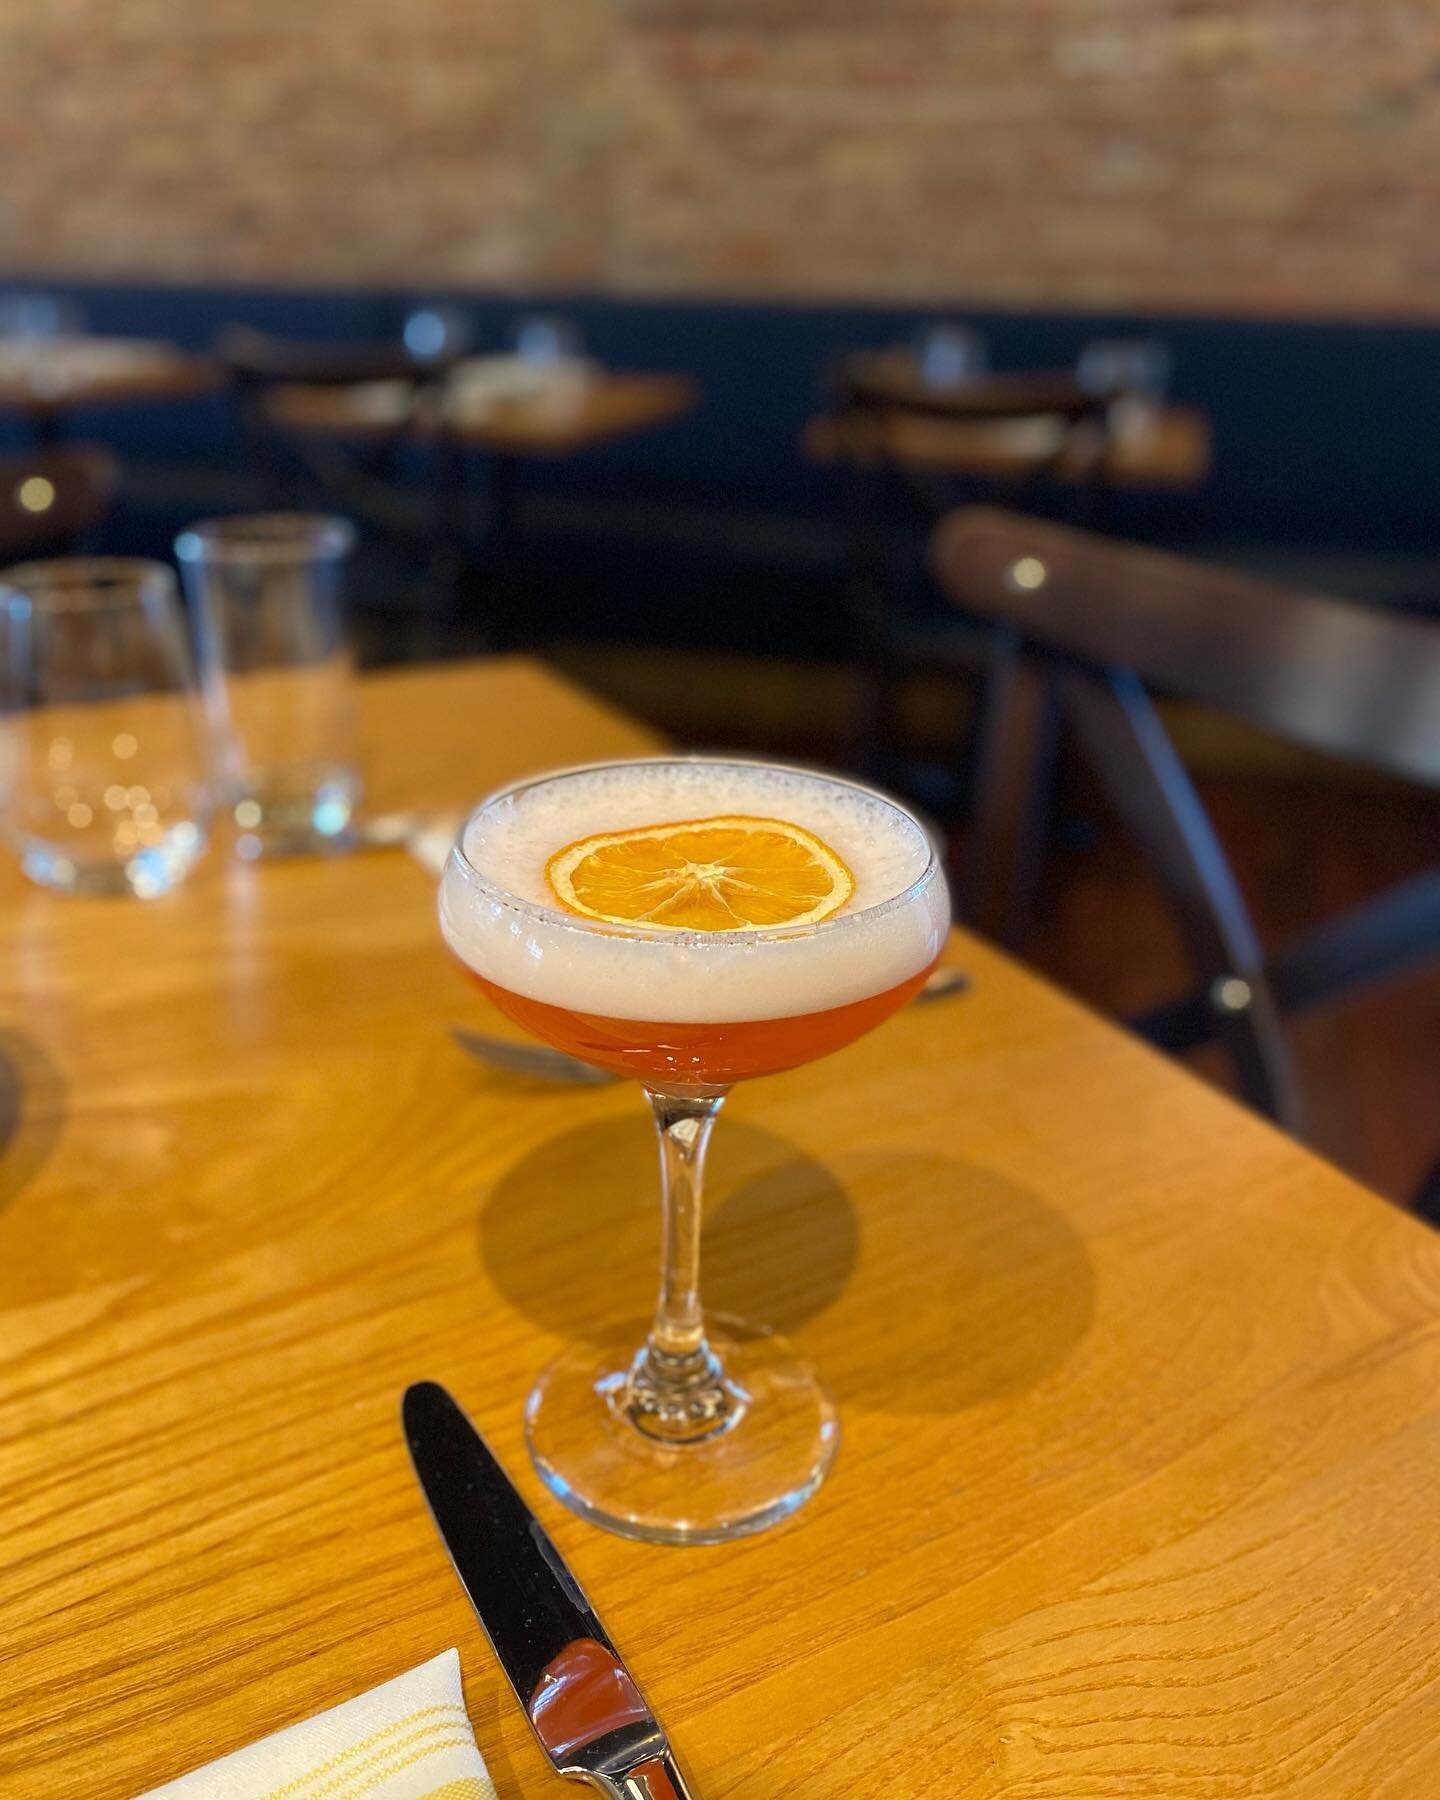 Rainy ☔️ weather got you down? Come join us at Citrine and try our new happy hour cocktail. The OP Marmalade. Gin, Campari, Lemon Juice, House-Made Marmalade Syrup.